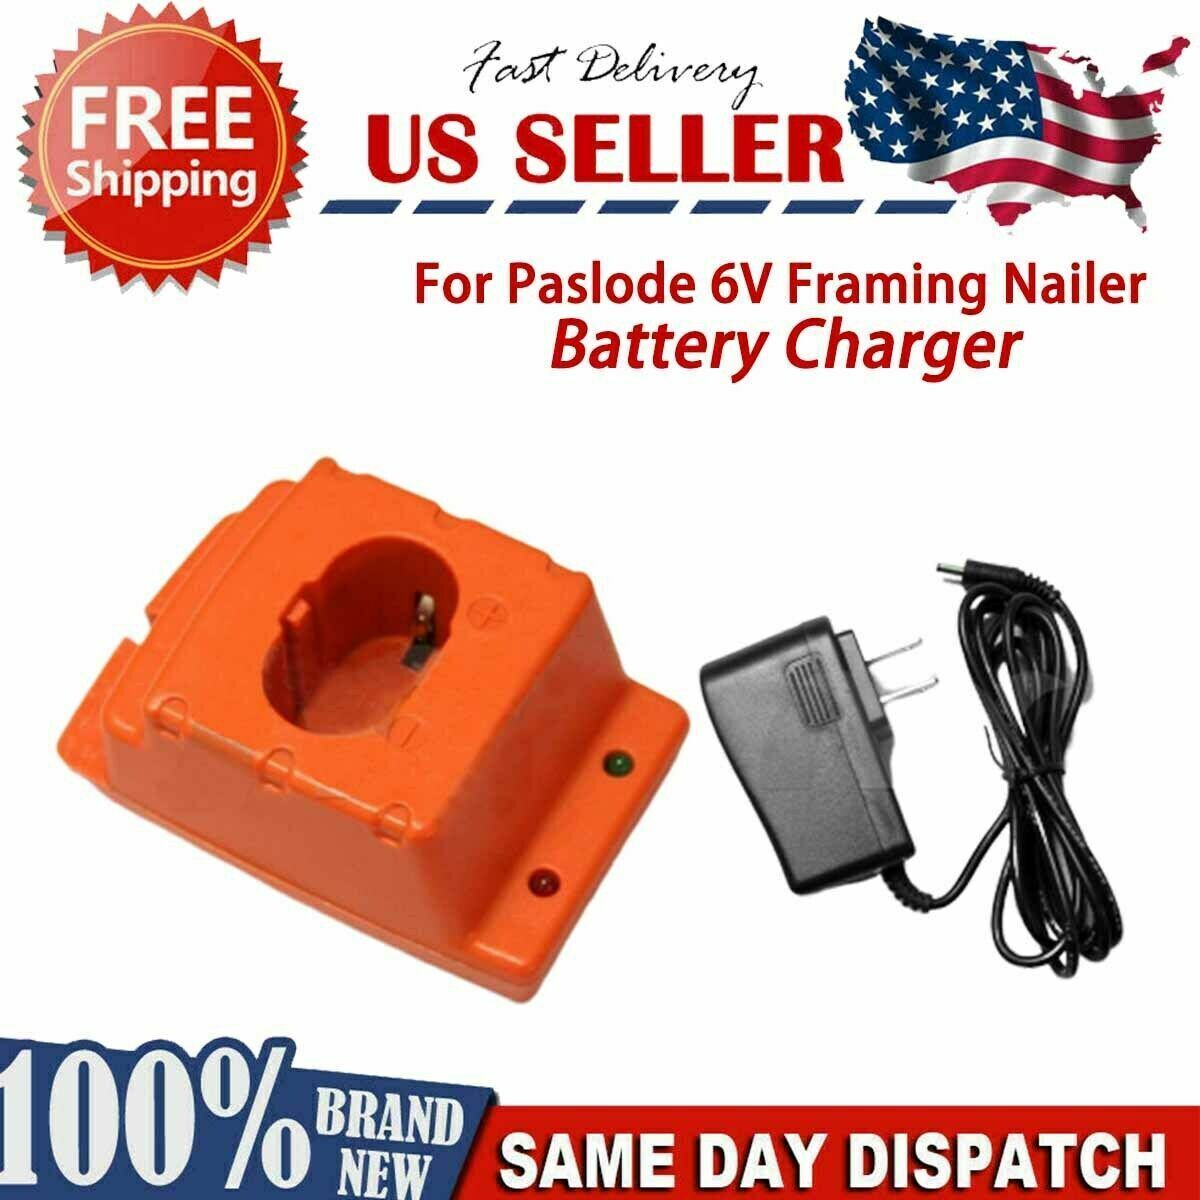 Battery Charger For Paslode Nailer Impulse 404717 902000 900420 902200 - $44.99